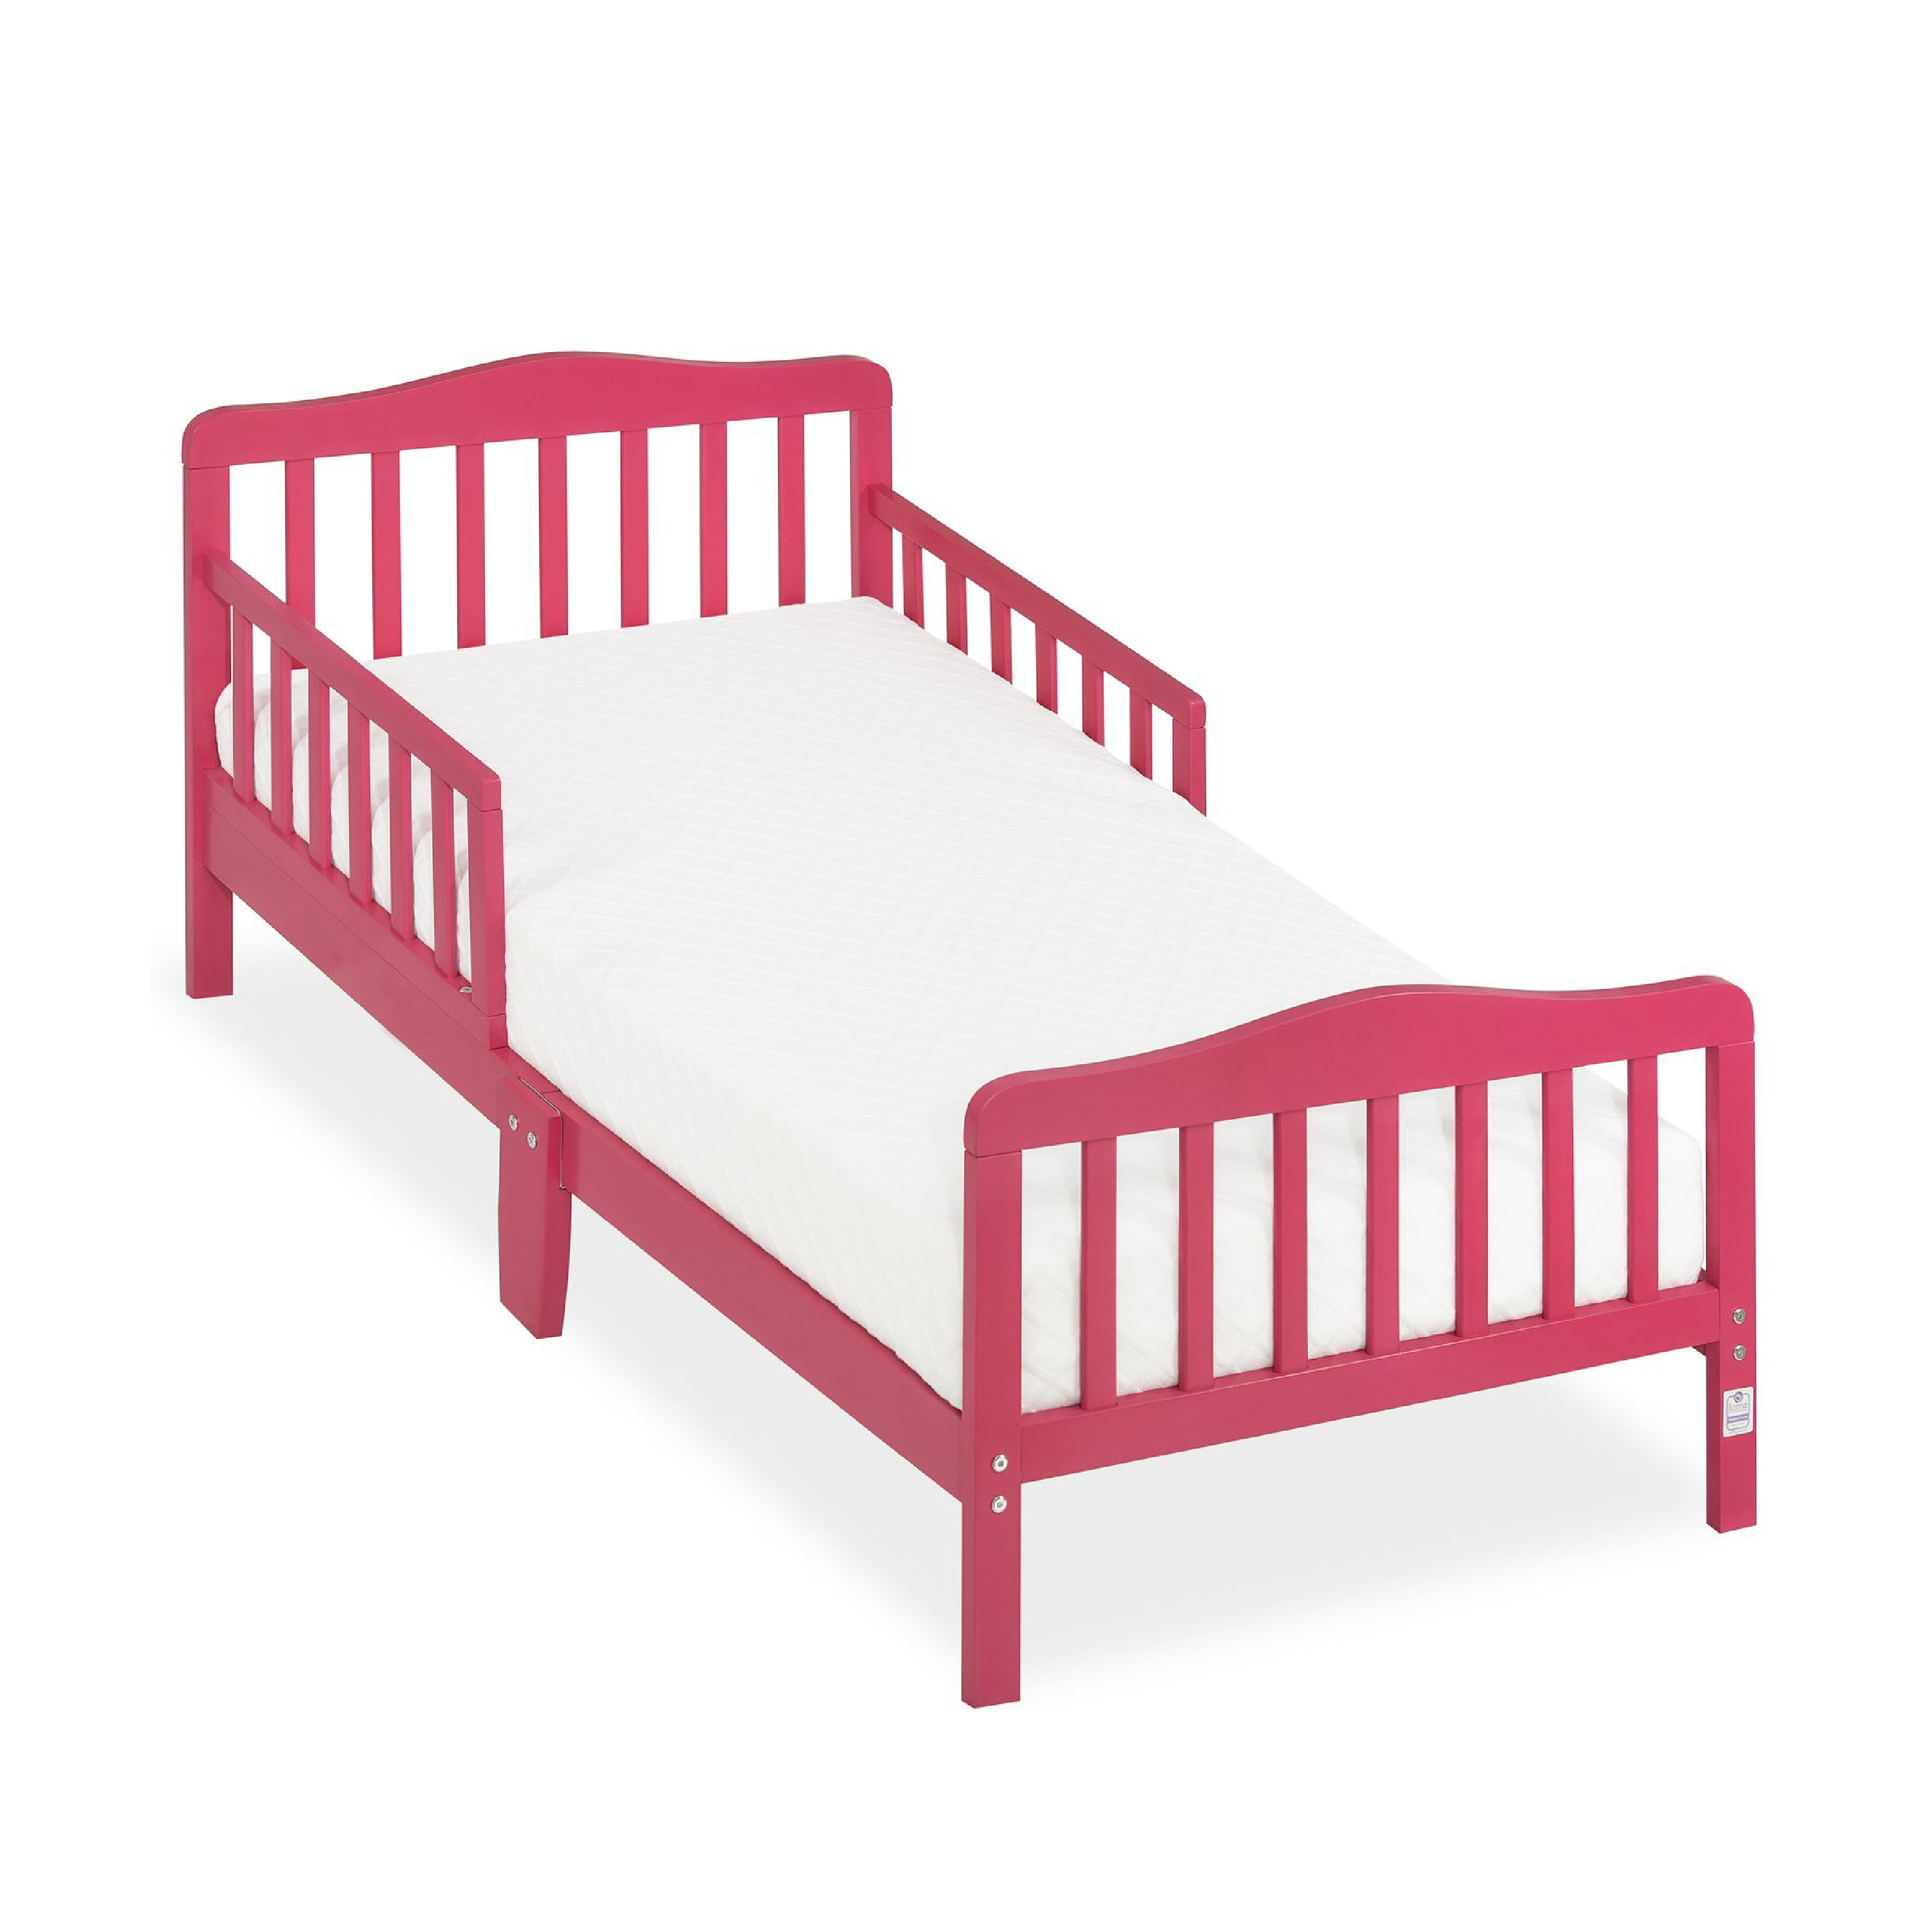 Dream On Me Classic Design Toddler Bed, Fuchsia Pink - image 1 of 11